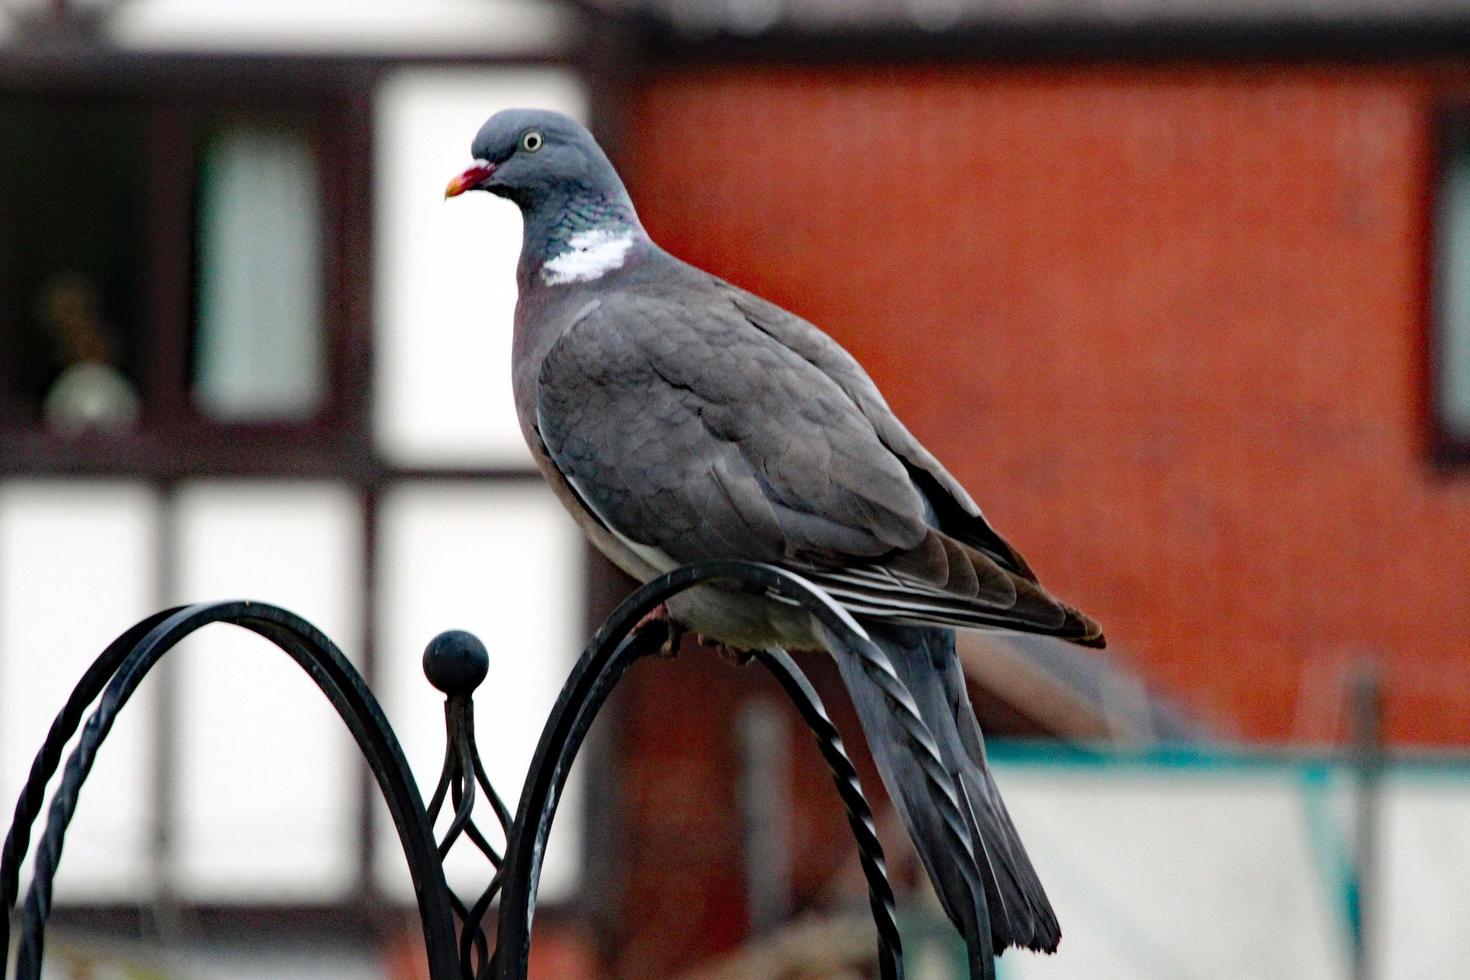 A view of a Pigeon in the garden photo